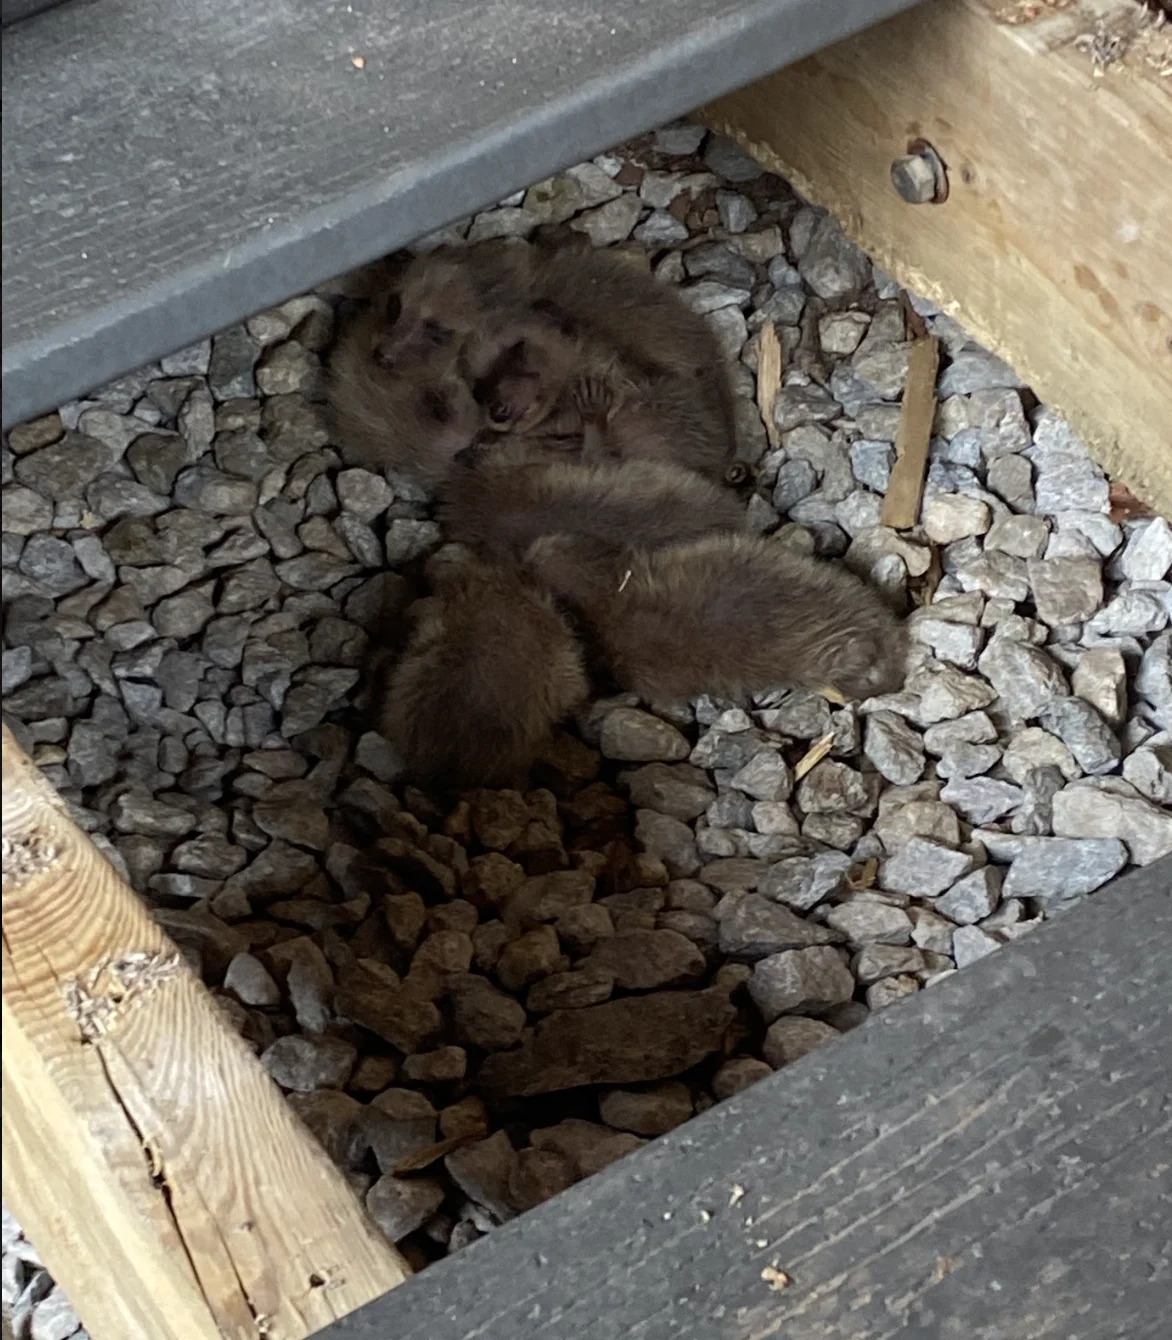 Andrea Bagley: Baby raccoons spotted in home